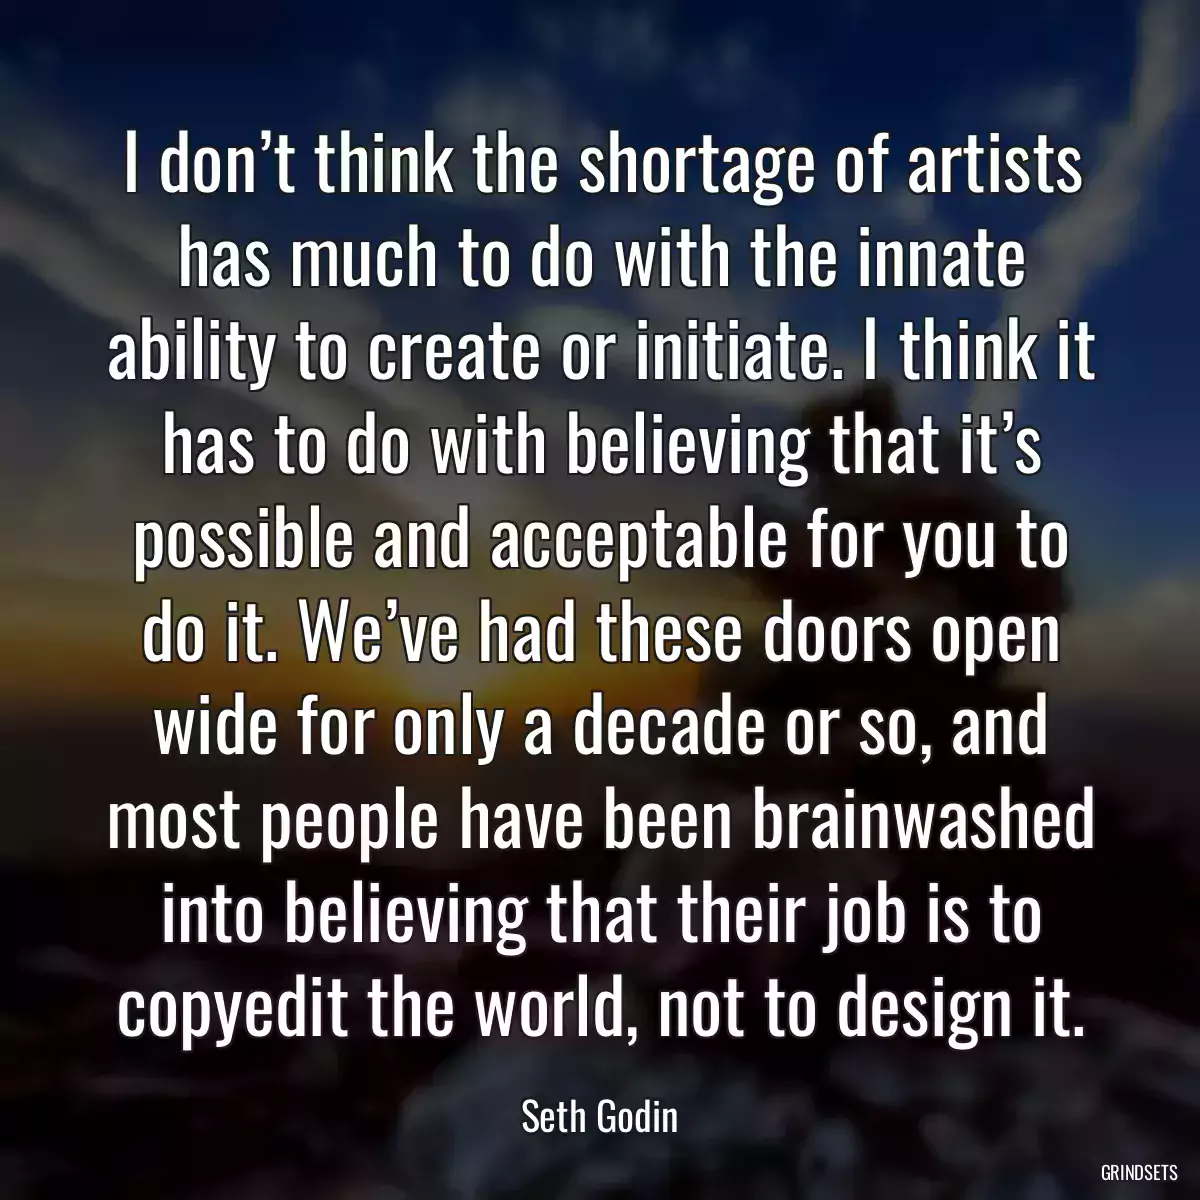 I don’t think the shortage of artists has much to do with the innate ability to create or initiate. I think it has to do with believing that it’s possible and acceptable for you to do it. We’ve had these doors open wide for only a decade or so, and most people have been brainwashed into believing that their job is to copyedit the world, not to design it.